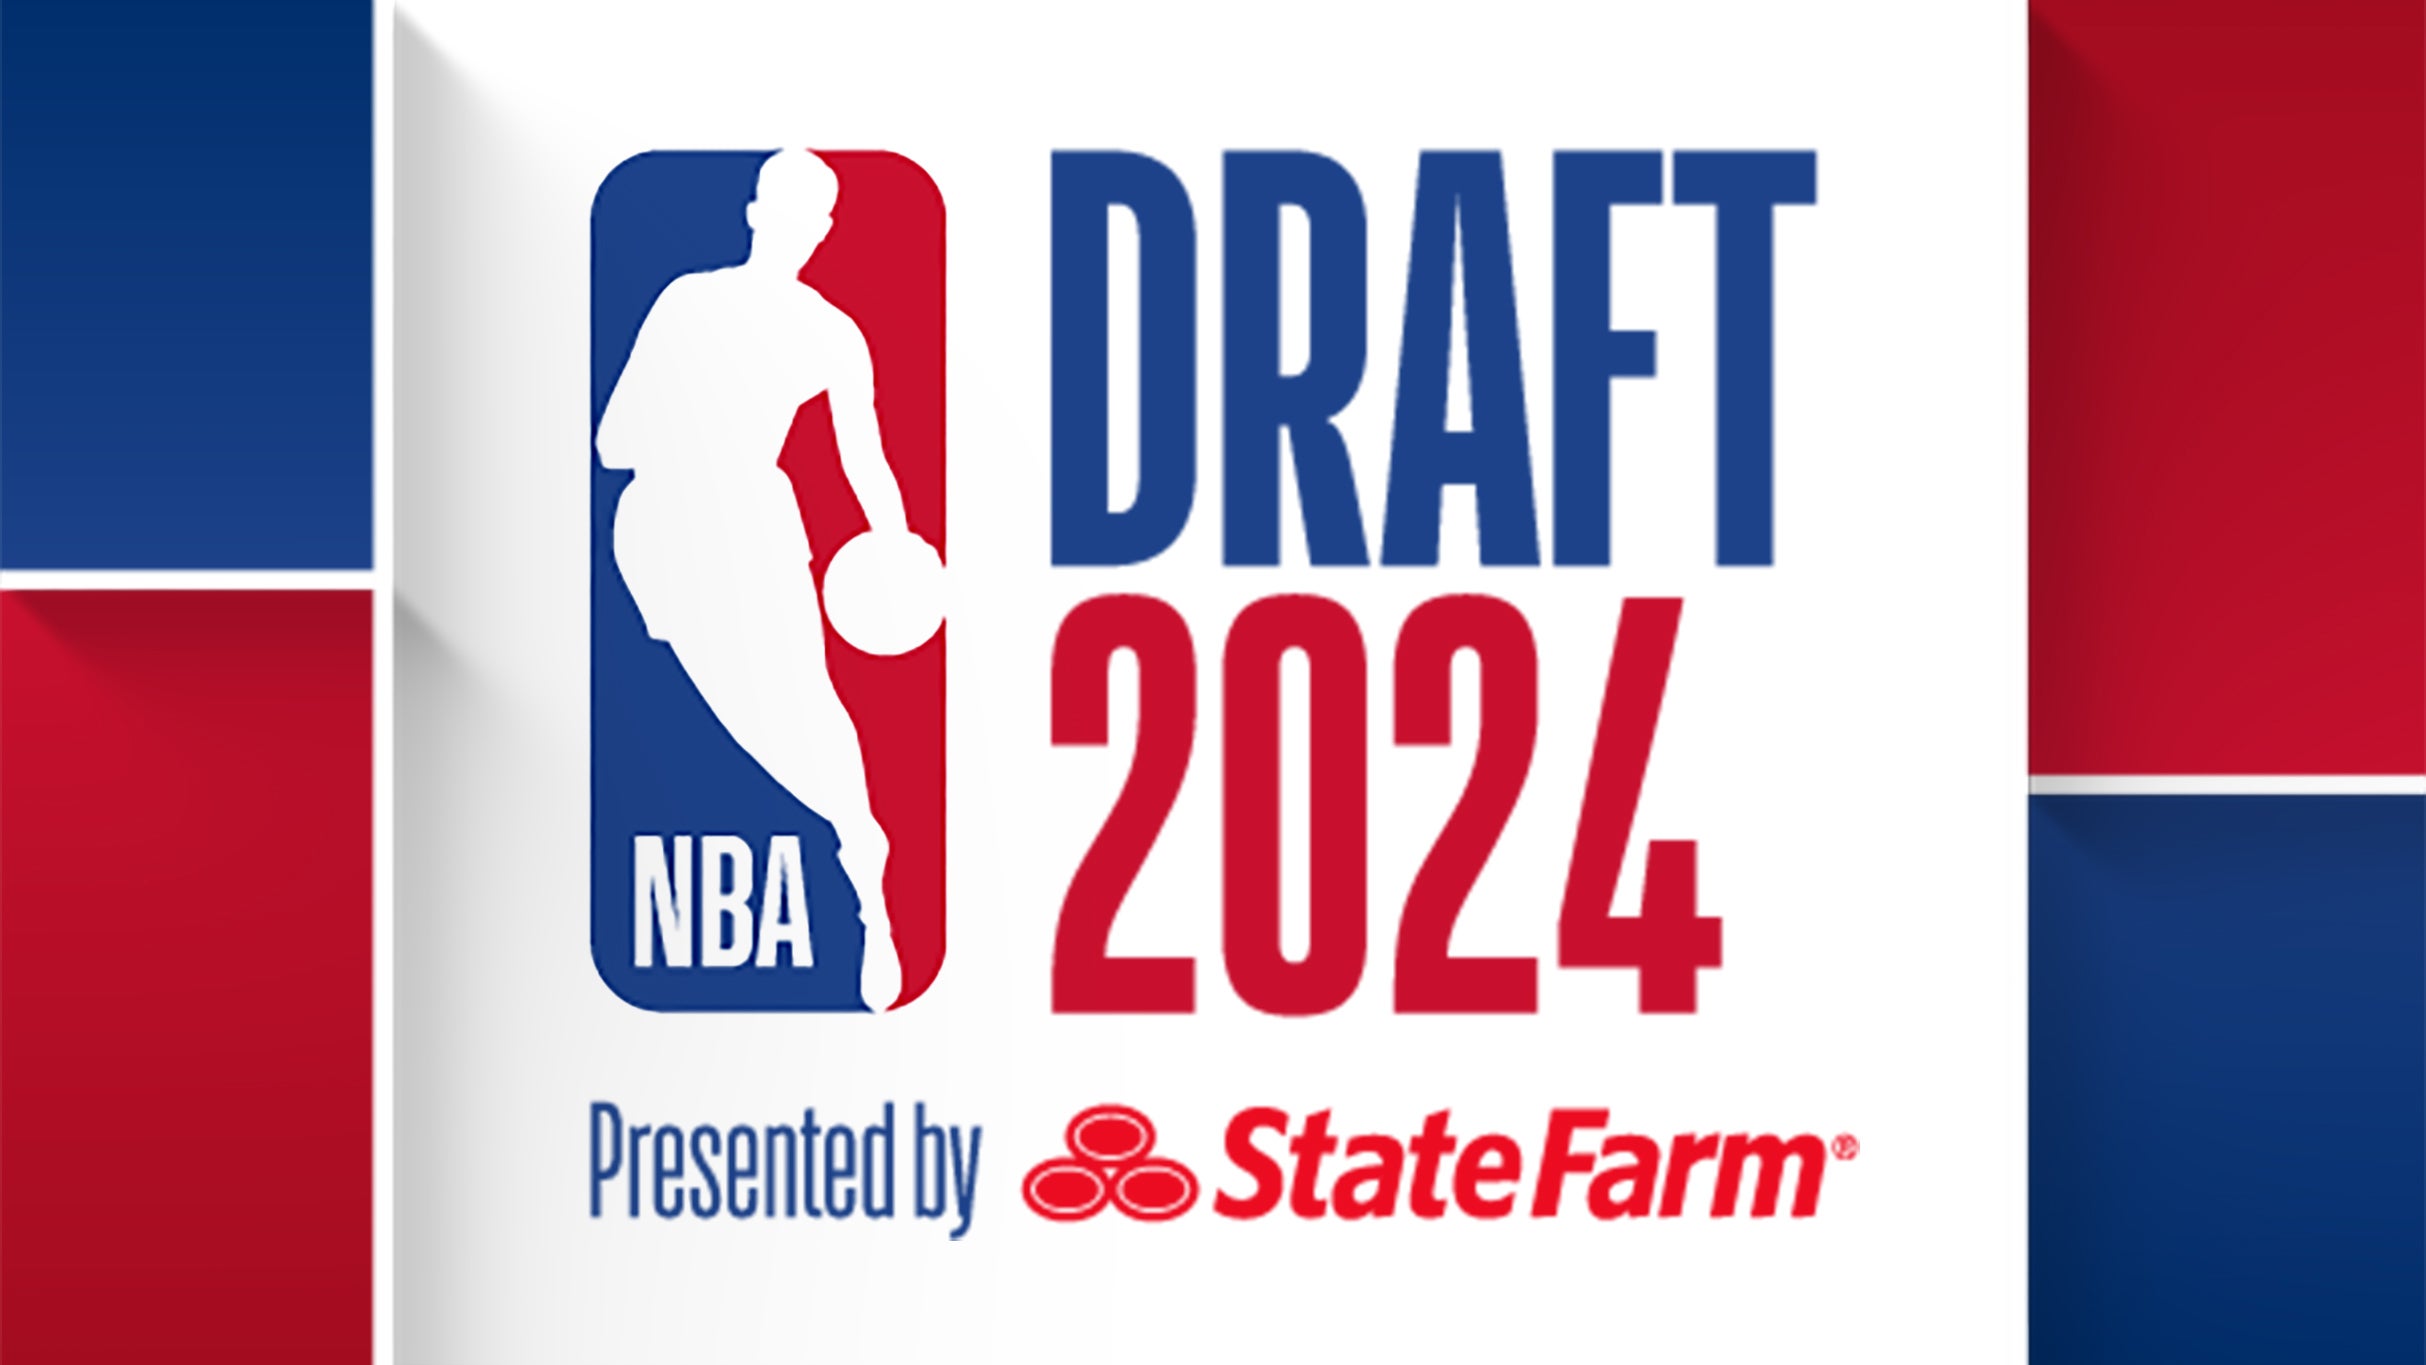 NBA Draft 2024 Presented by State Farm - First Round in Brooklyn promo photo for Barclays Center presale offer code